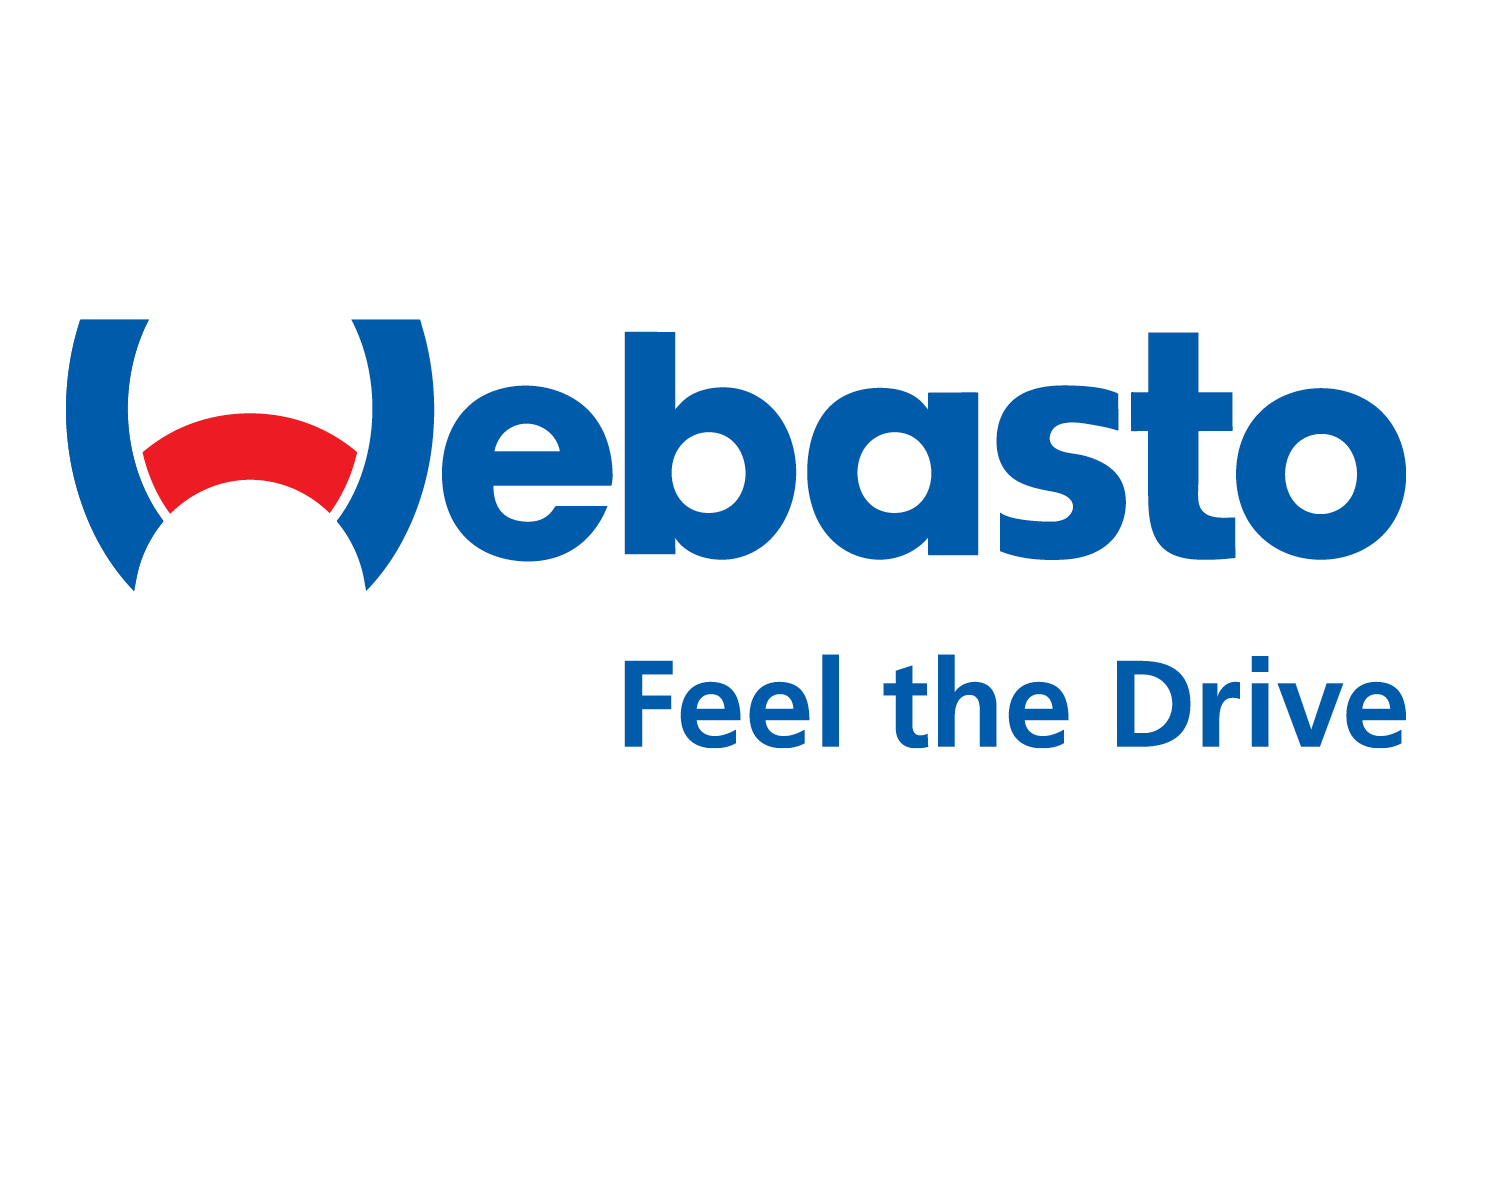 Webasto Thermo & Comfort North America is a global tier-one automotive and aftermarket equipment manufacturer,